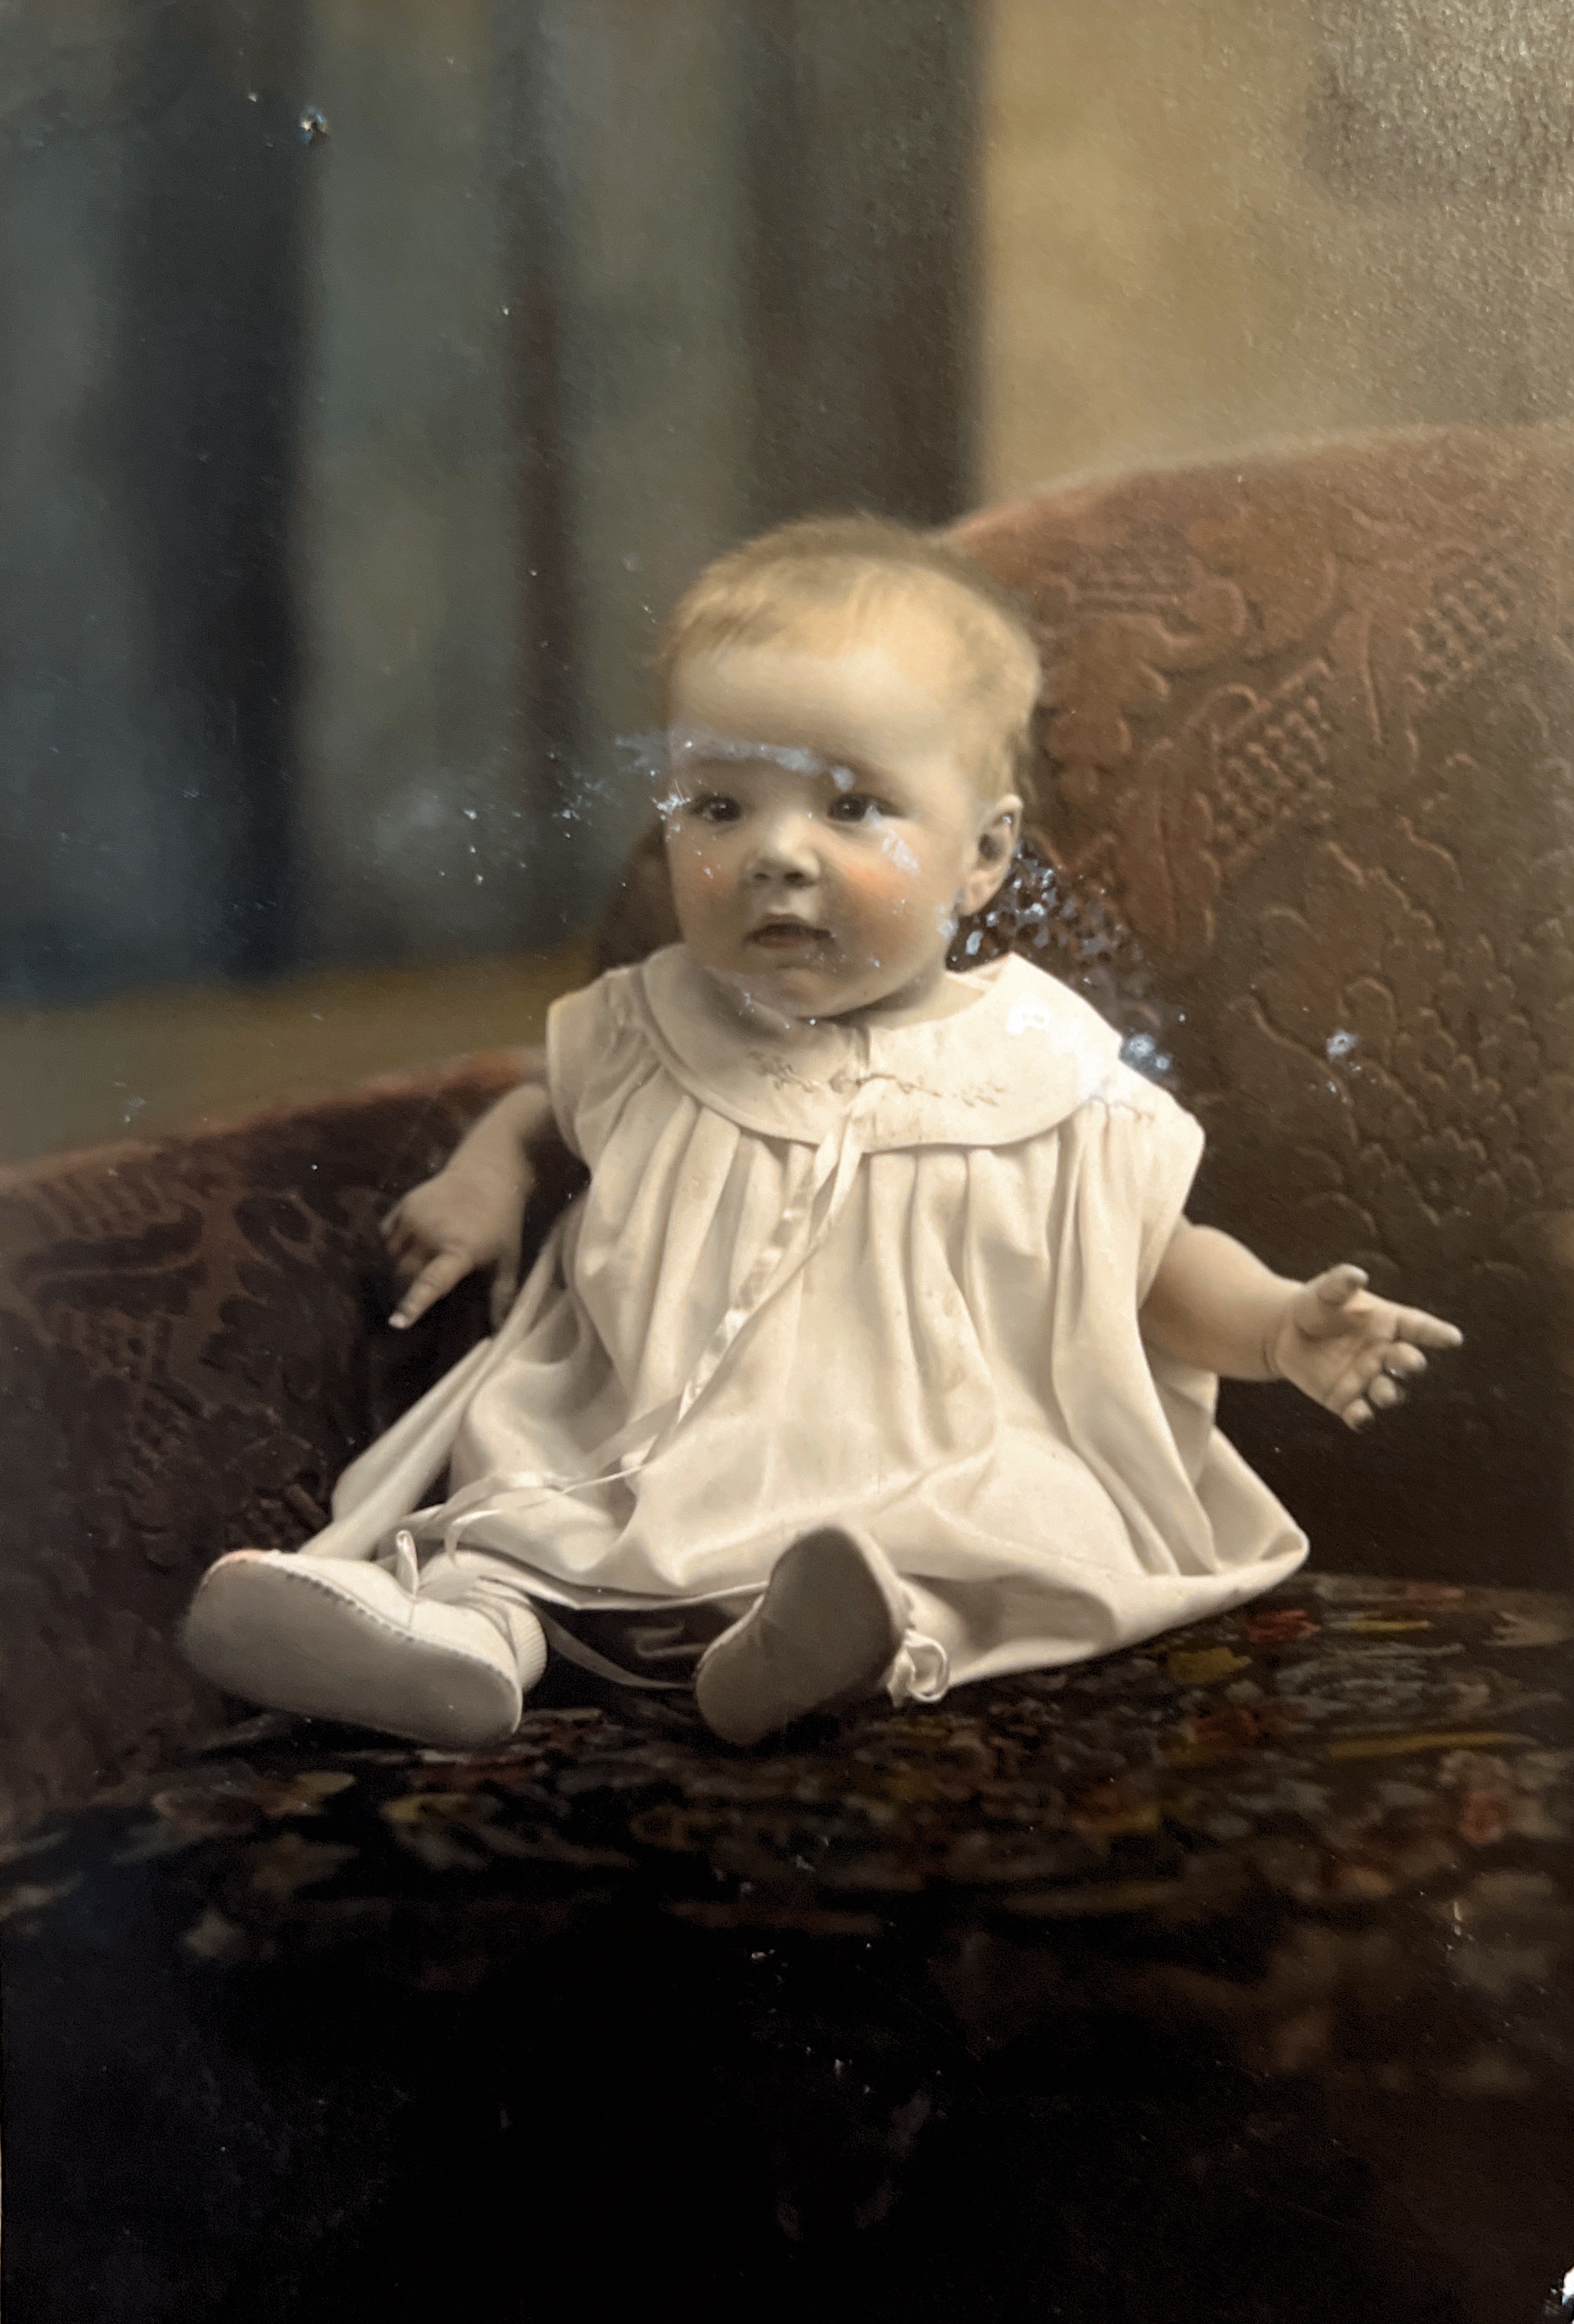 My grandmother at 6 months old - 1931